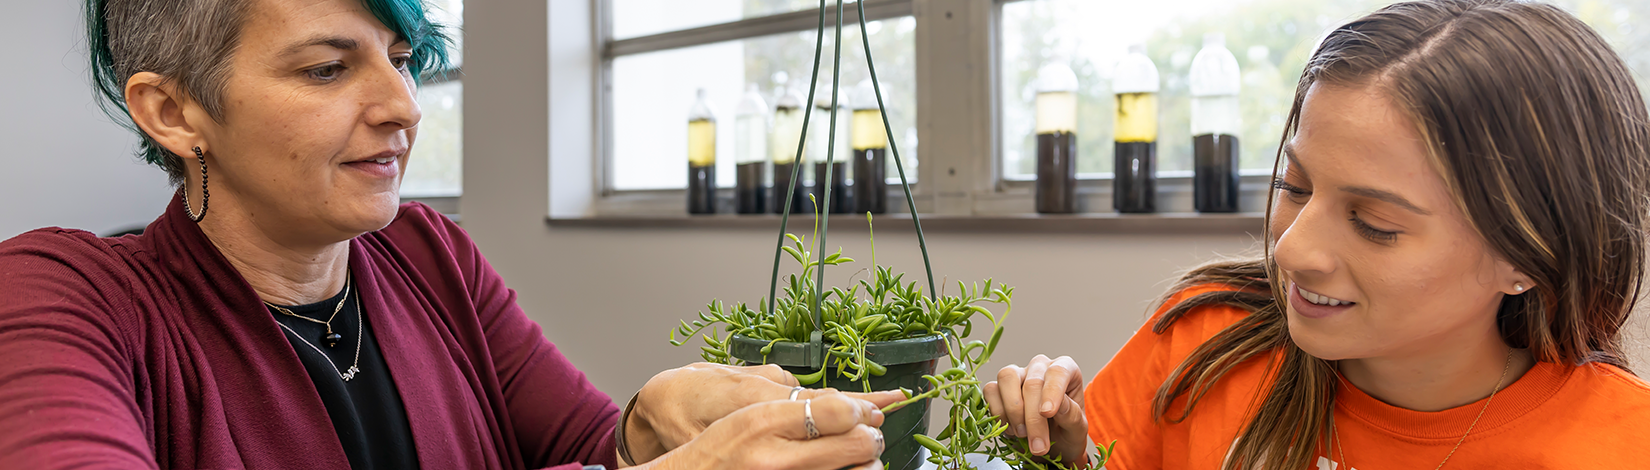 Faculty member and student observe a plant.